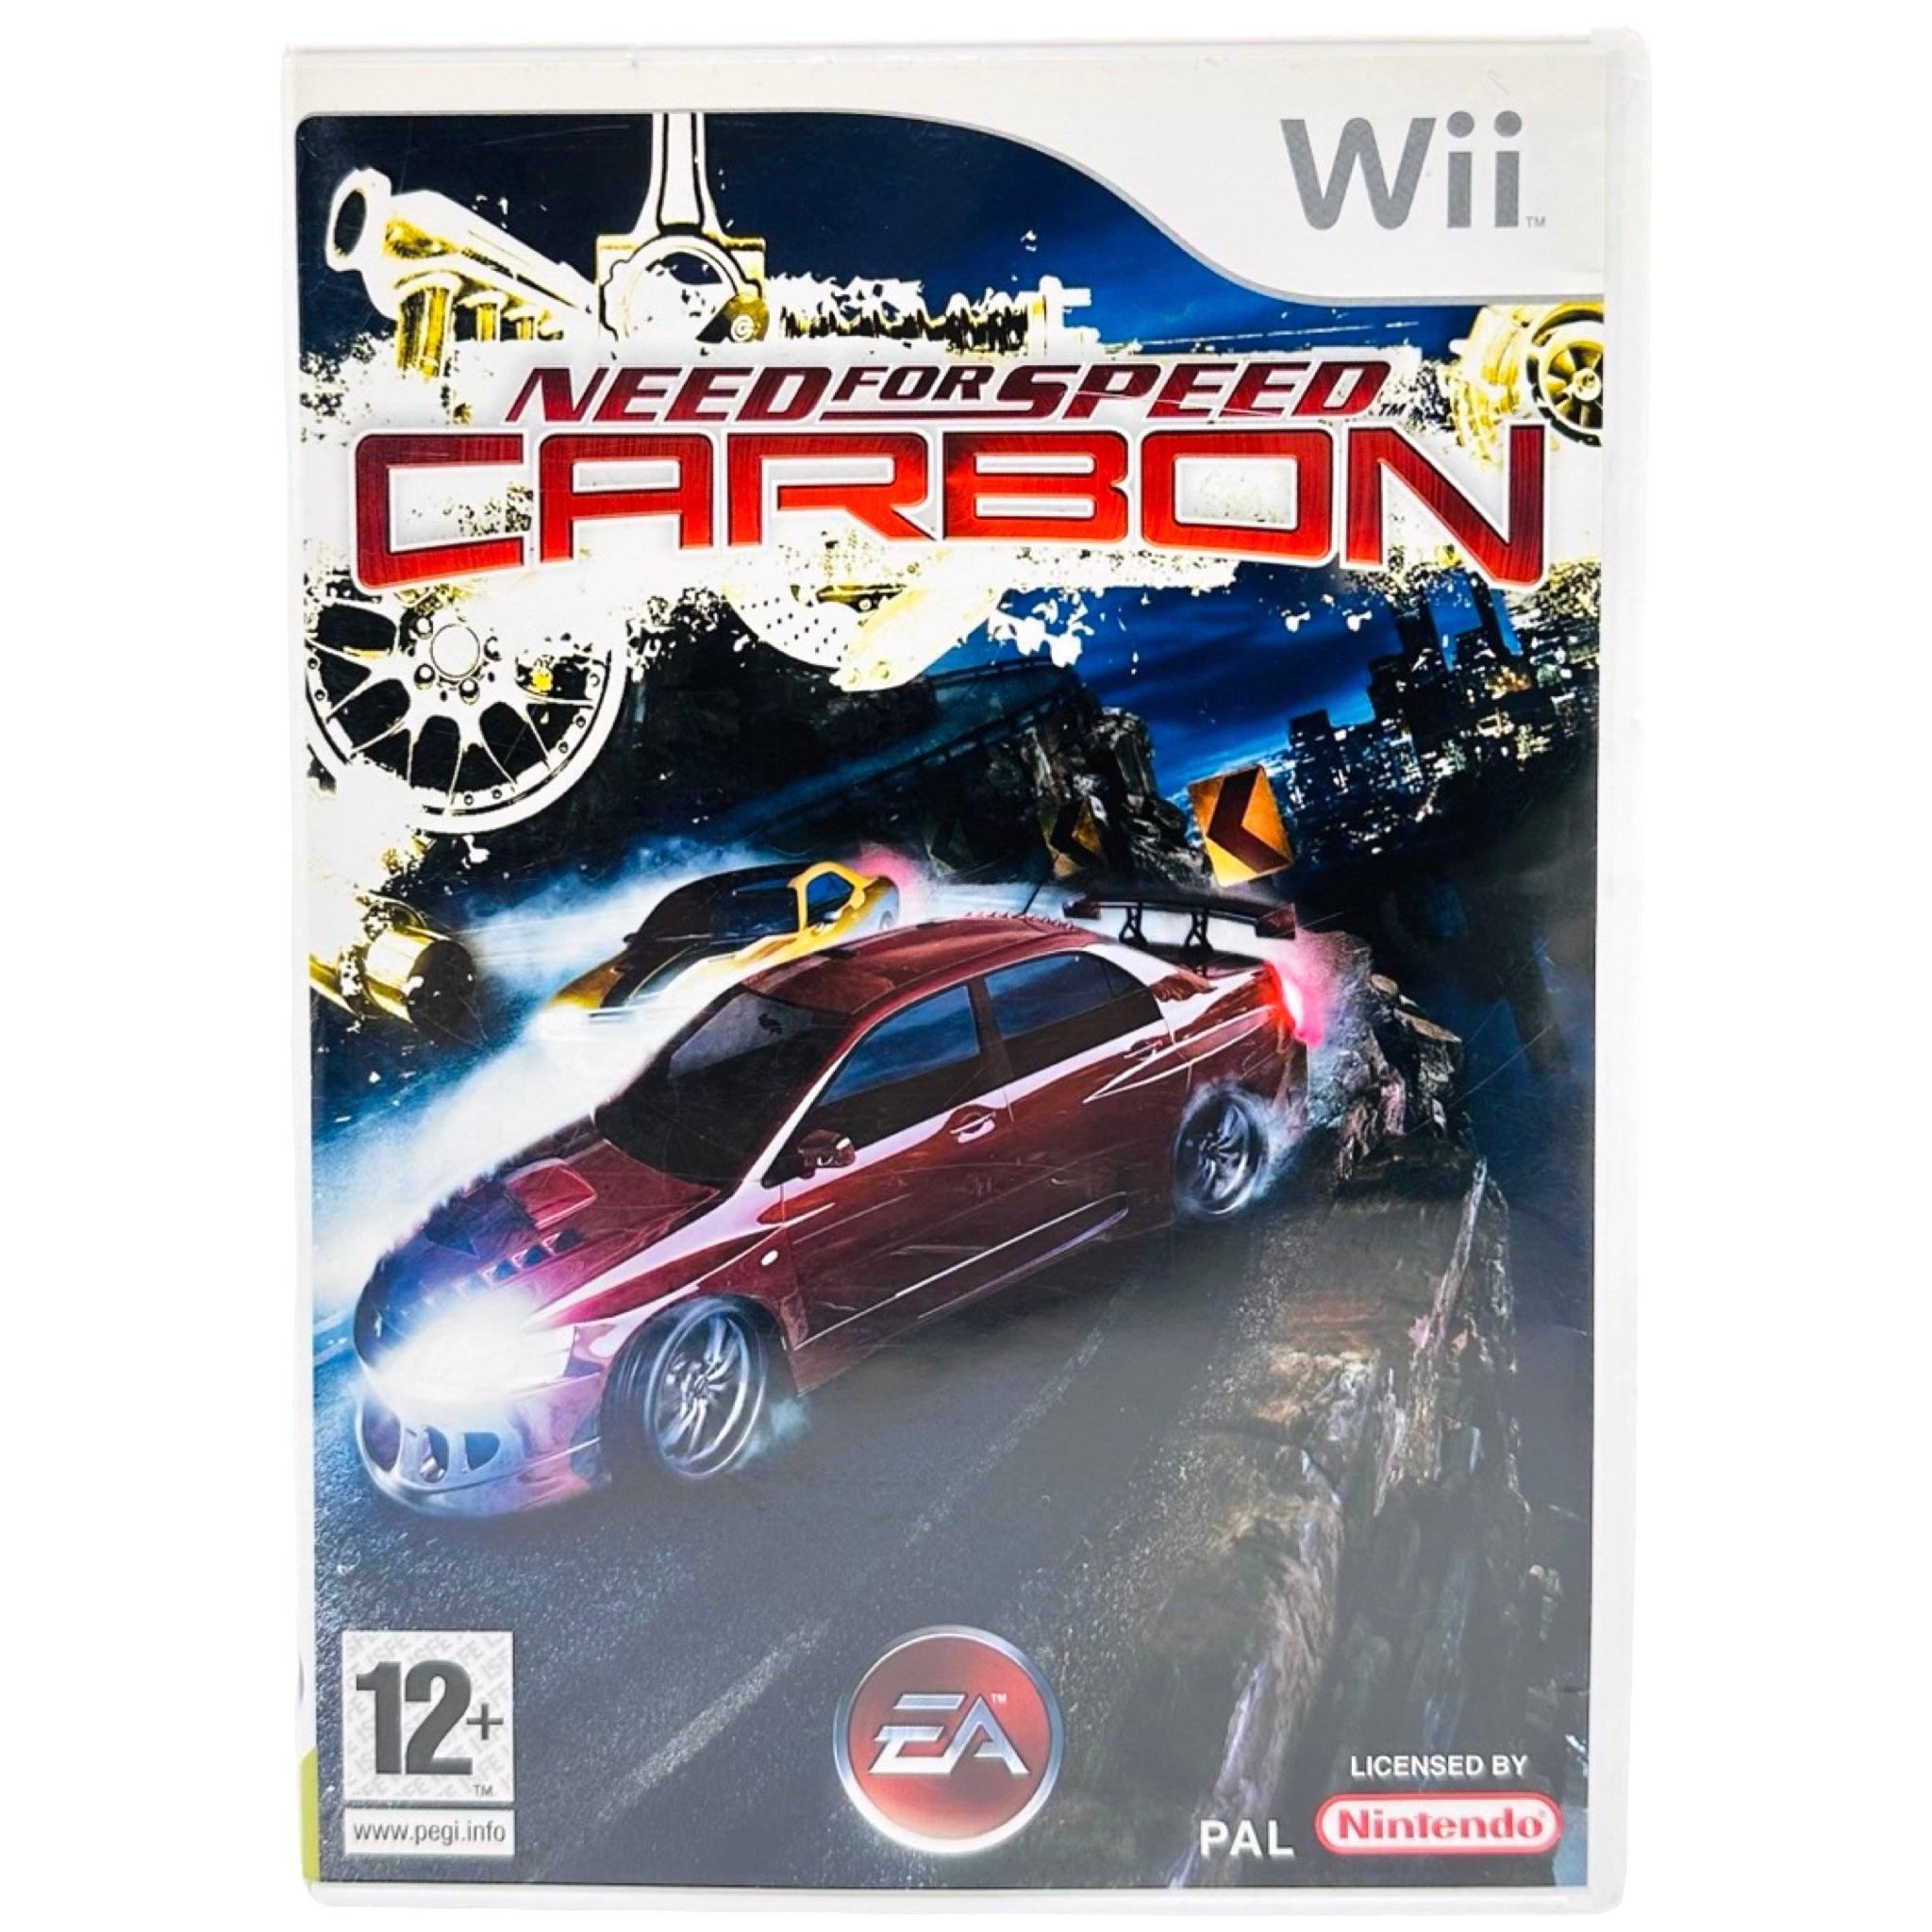 Wii: Need For Speed: Carbon - RetroGaming.no